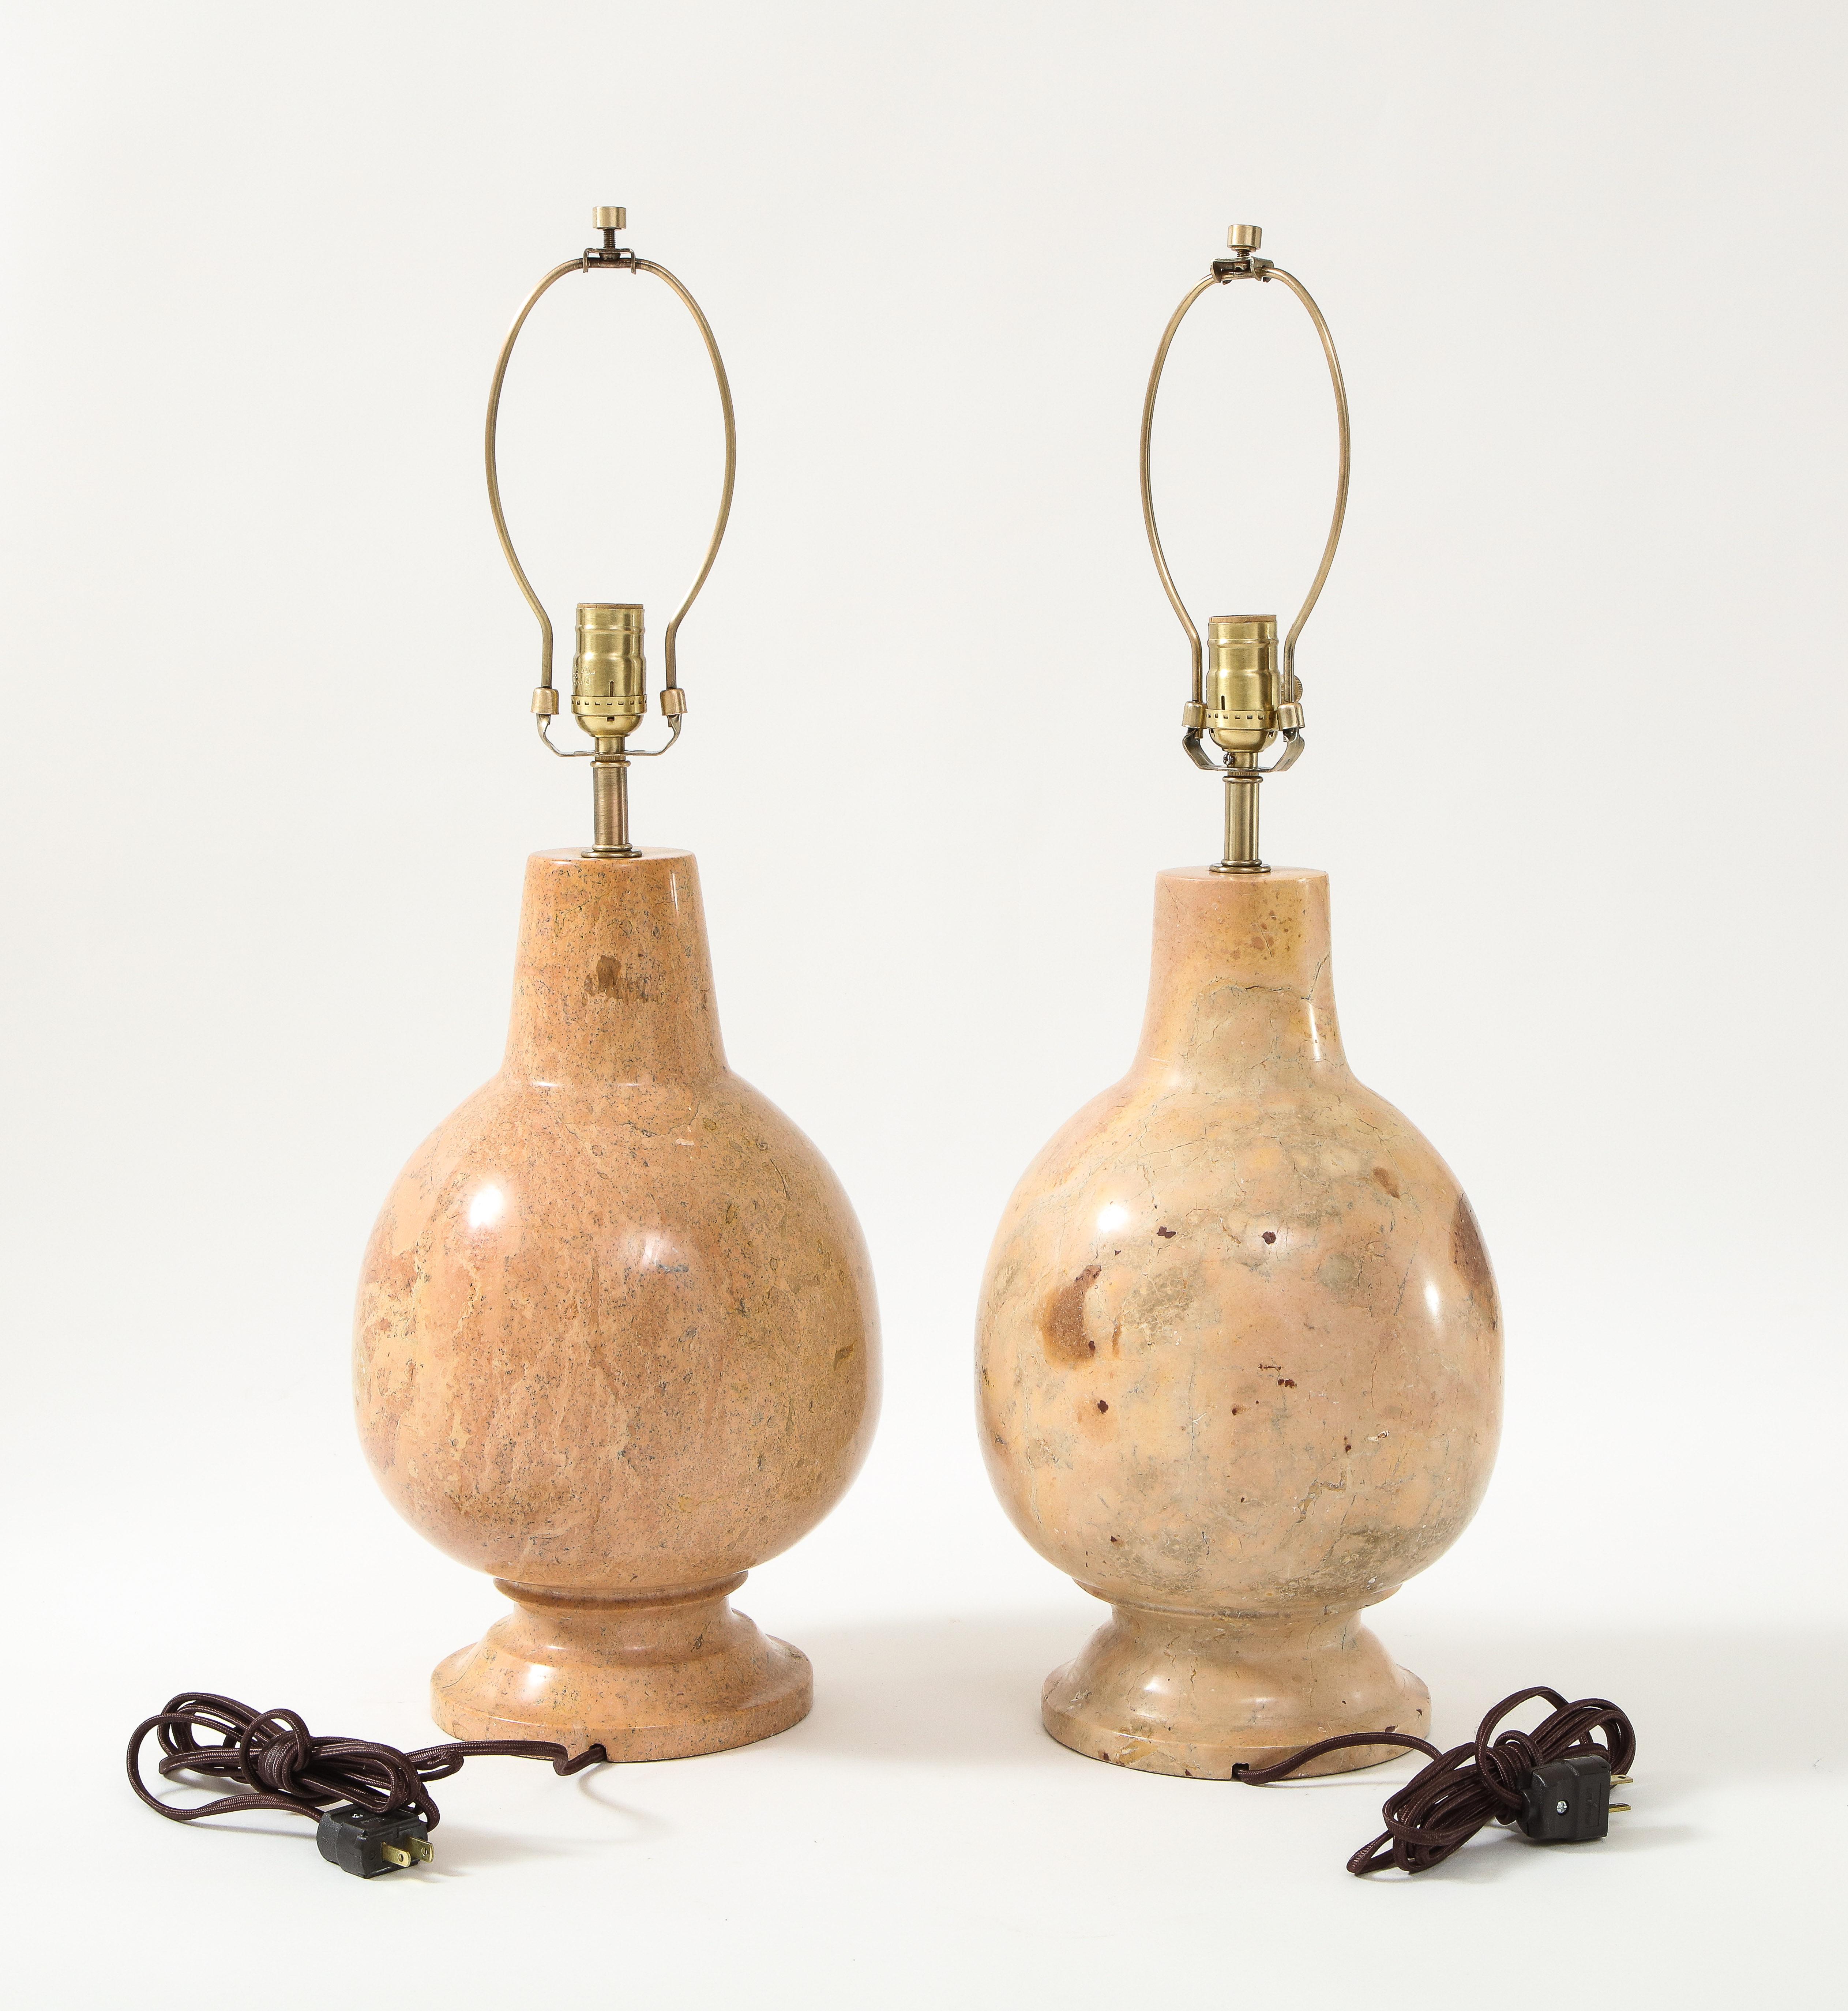 Pair of handmade Italian polished solid marble lamps with a bulbous form. Marble is a fantastic mix of beige neutrals and sandy tones. Rewired and sockets converted for use in USA using brass hardware.
Minor wear to bottoms.